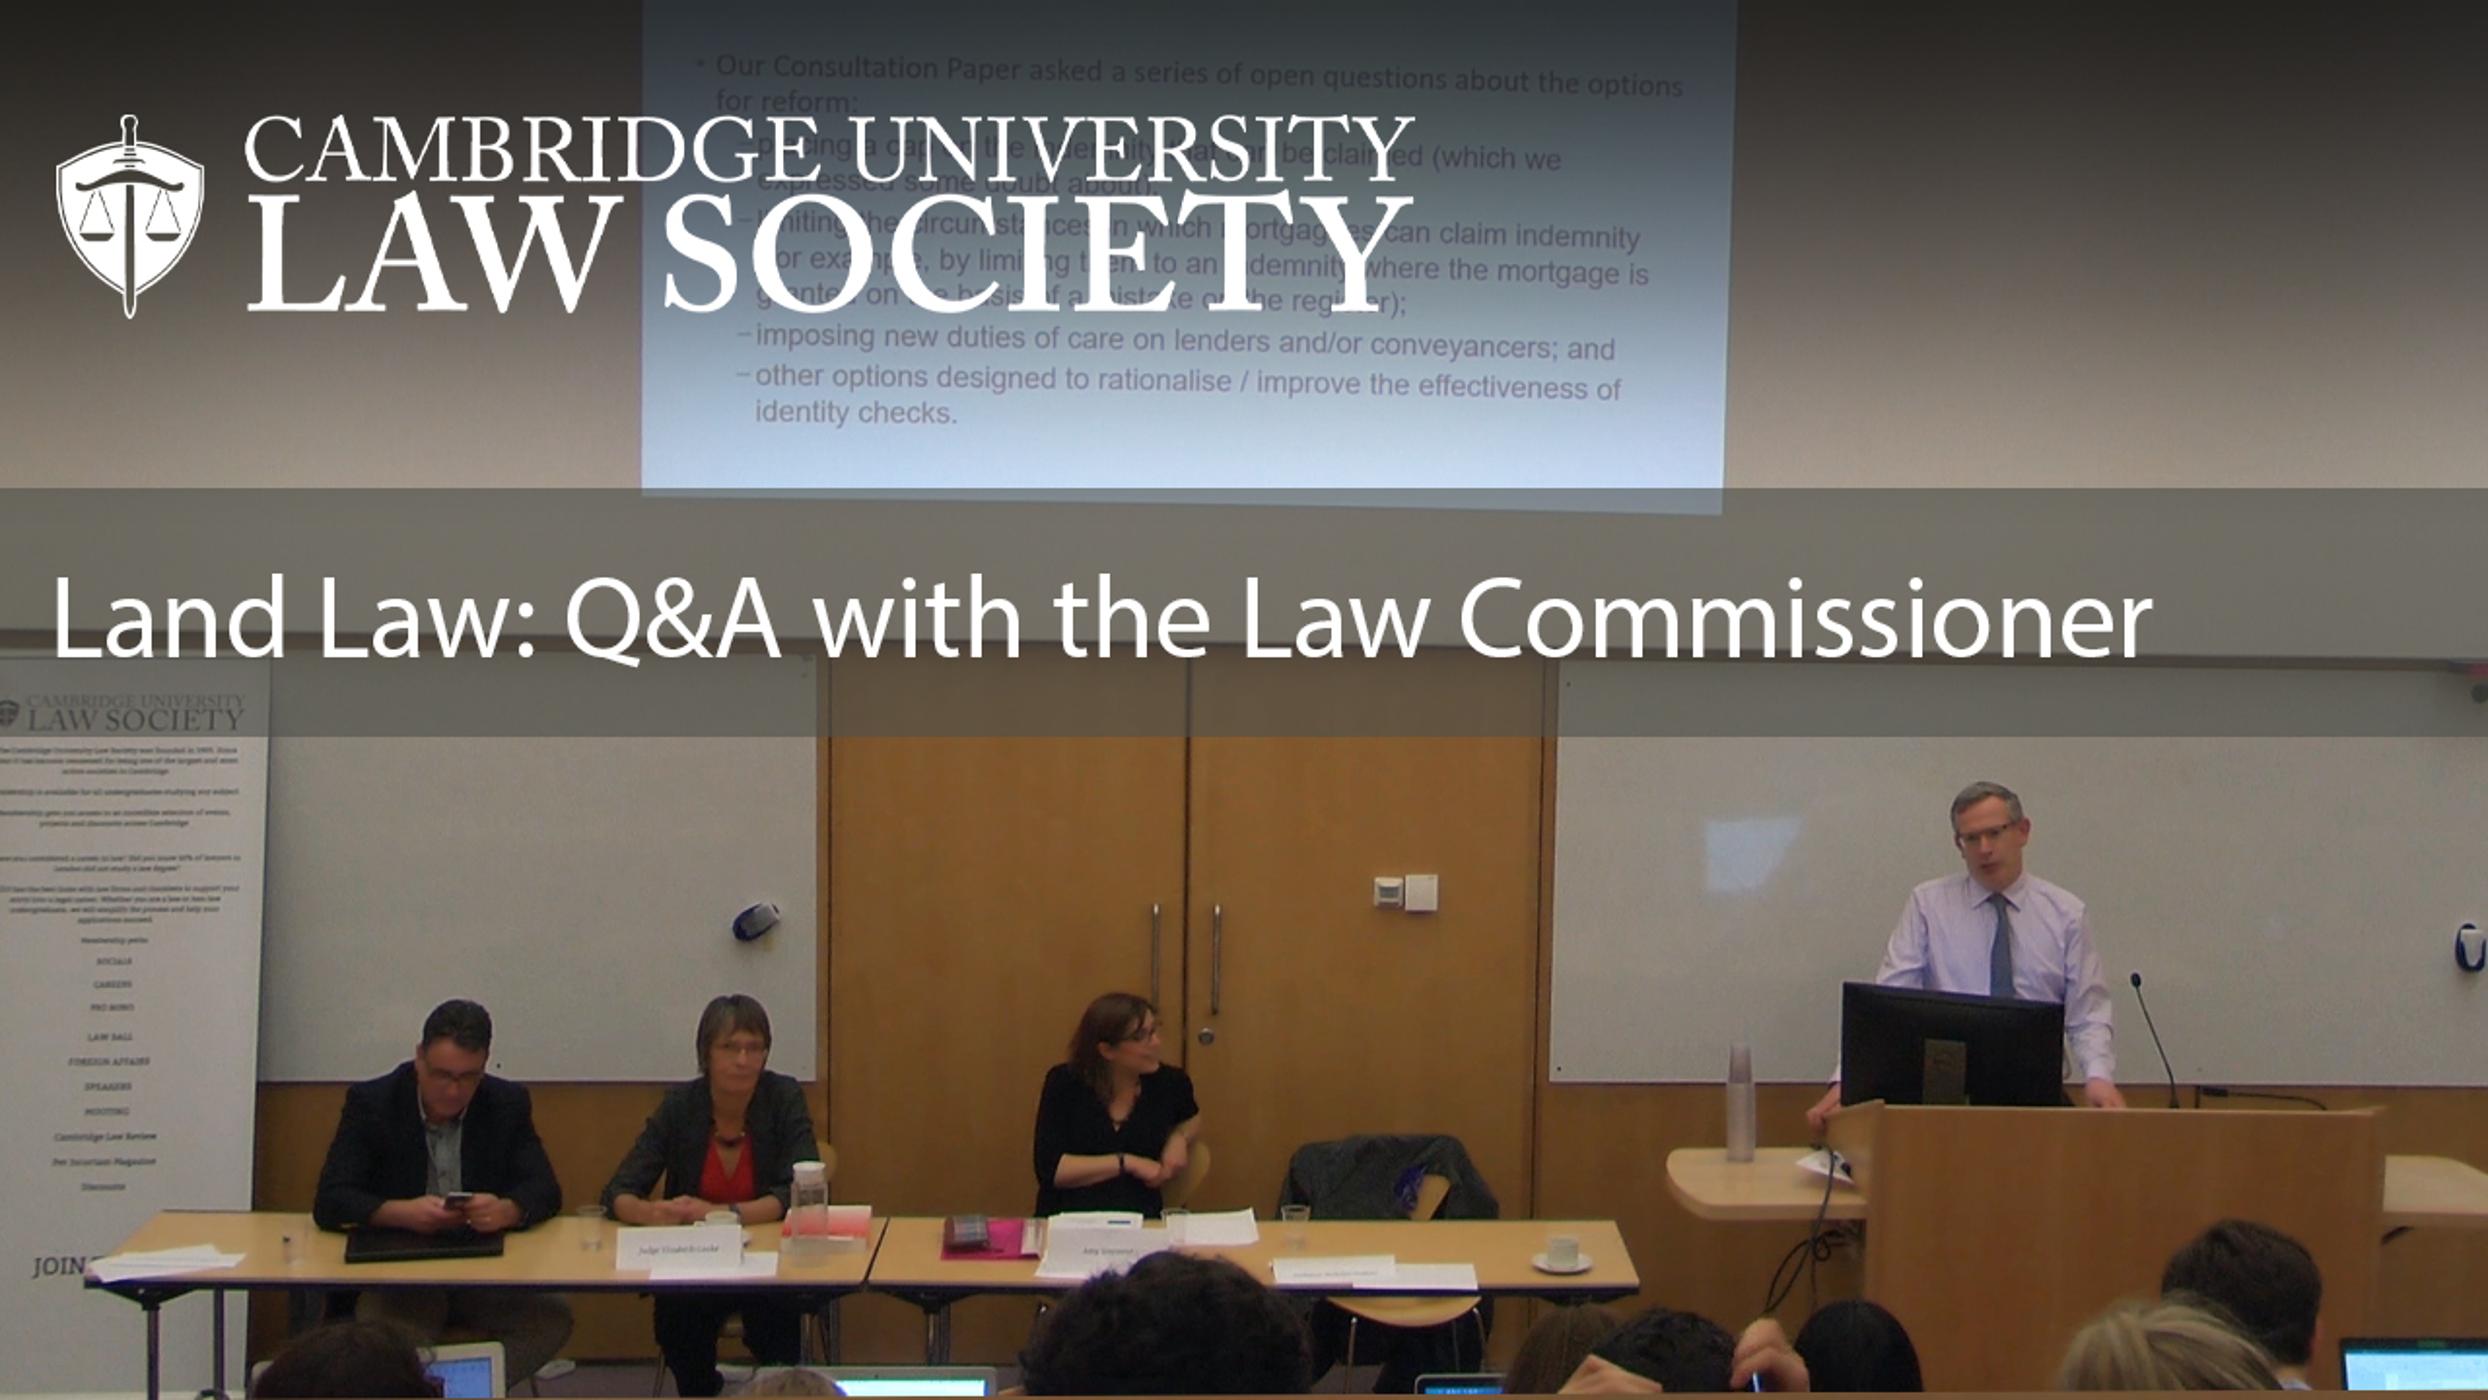 Land Law: Q&A with the Law Commissioner: CULS Panel event